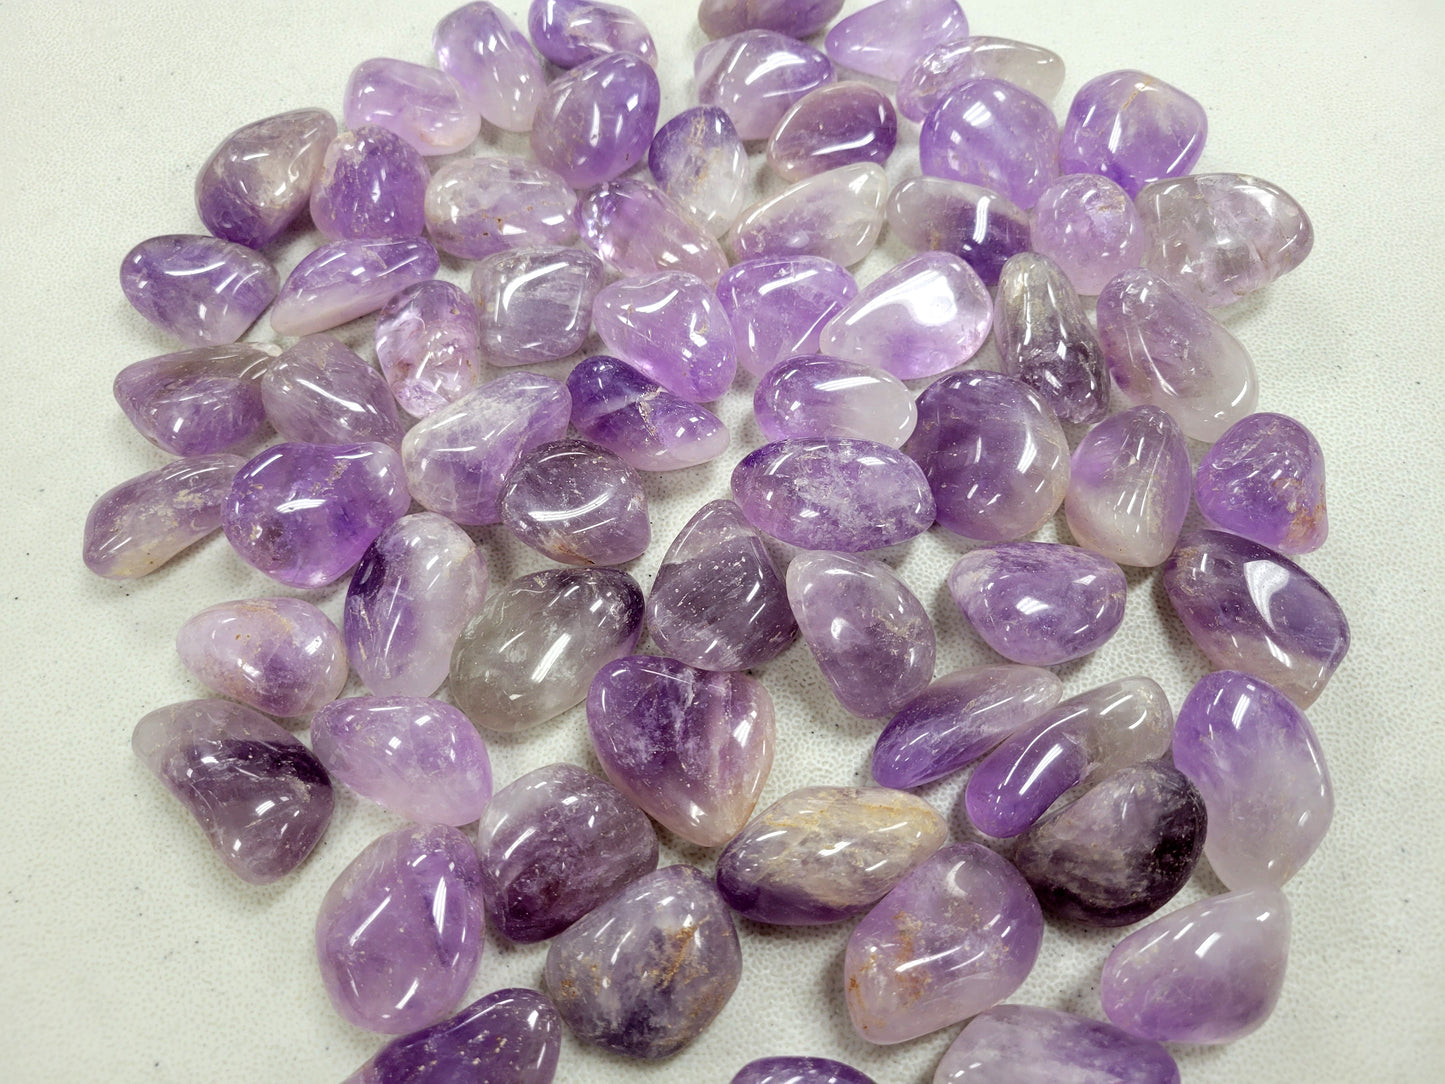 Large Tumbled Amethyst Crystals - 1.5 to 2.5 inches